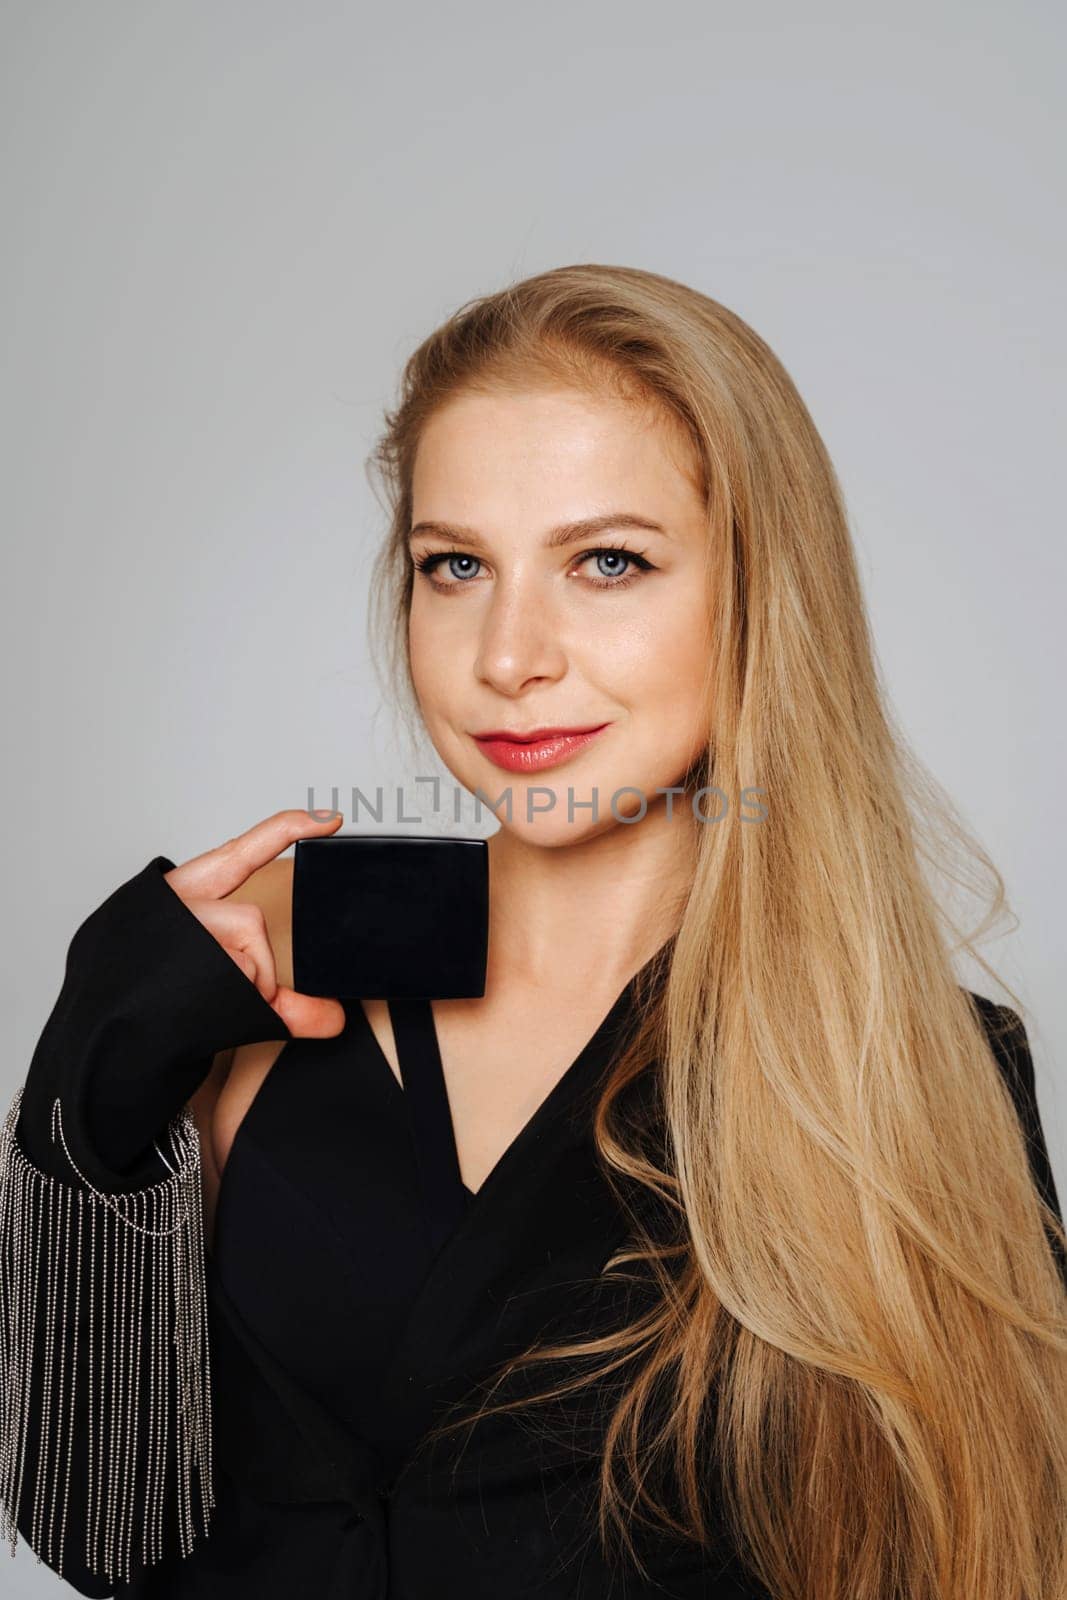 Beautiful middle-aged woman makeup artist holds shadows in her hands and looks at the camera smiling. Blond hair and a black jacket on a light background